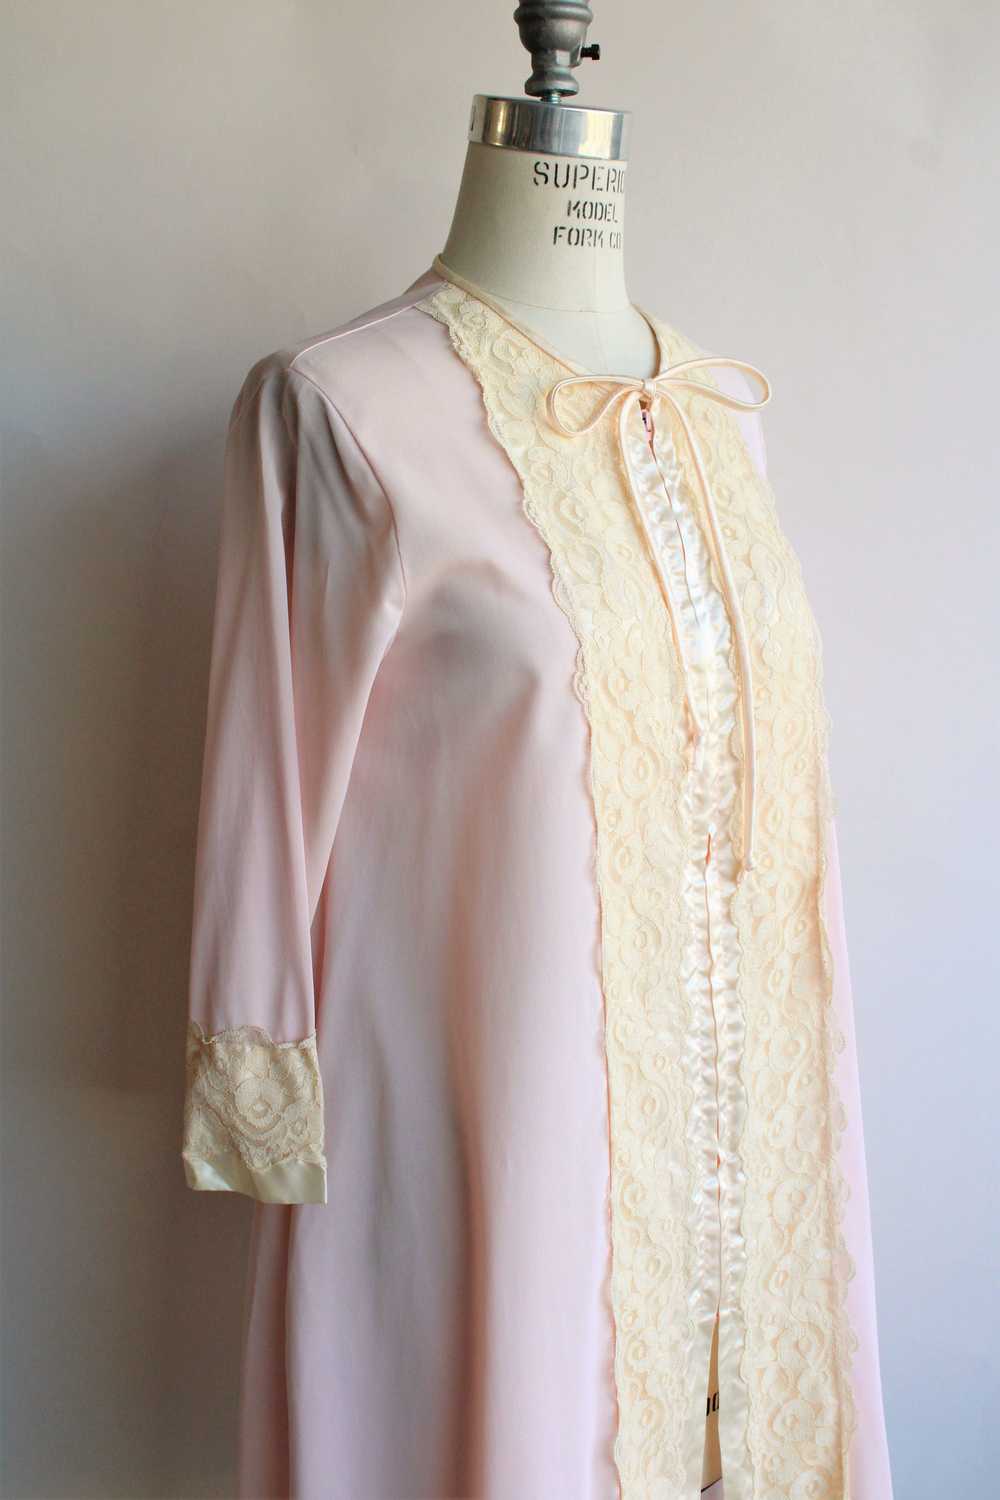 Vintage 1970s Gilead Pink And Lace Nylon Robe wit… - image 4